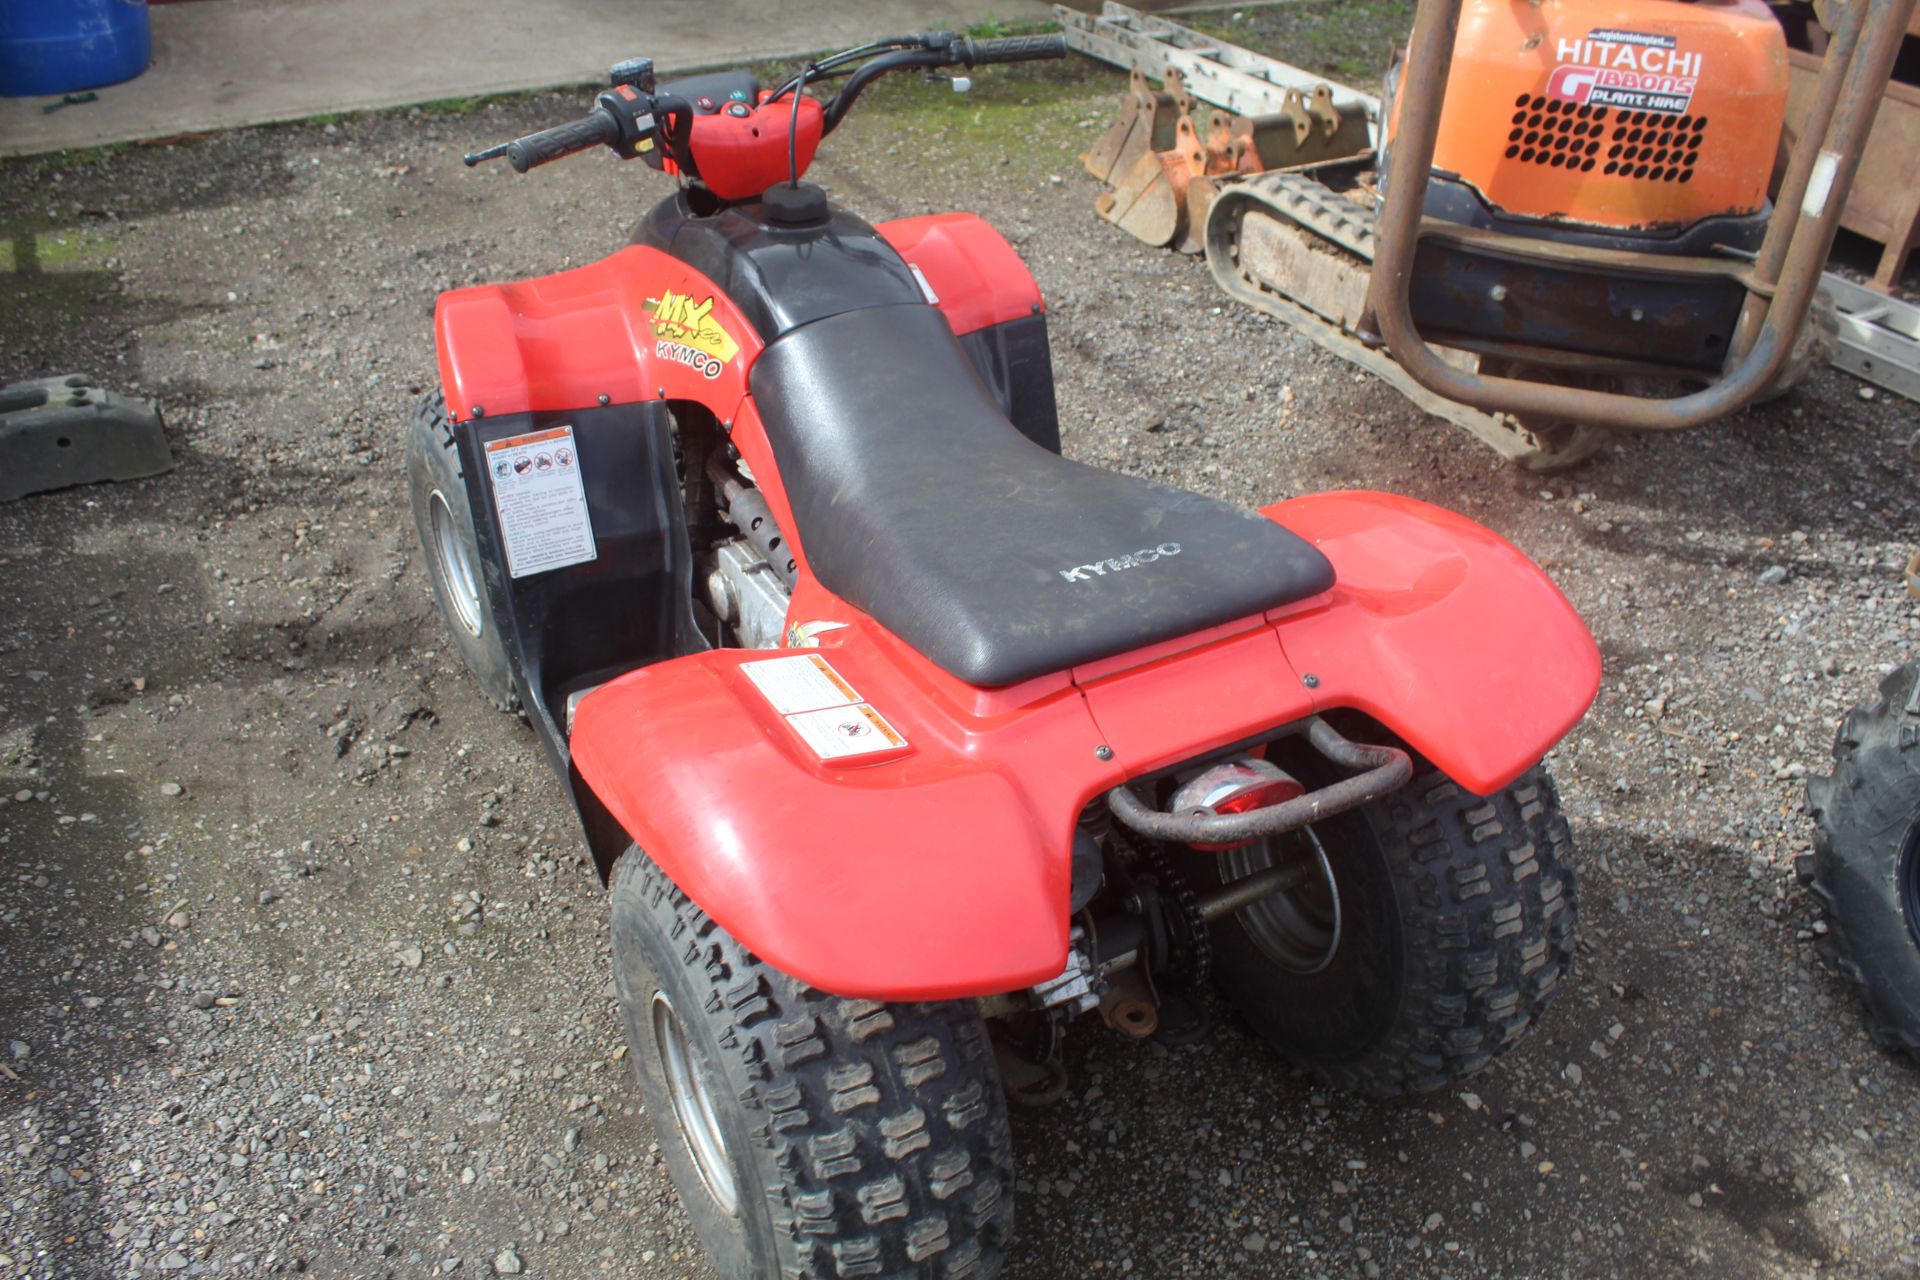 Kymco MX'er 150cc off road ATV. 2004. owned from new. Key, Manual held. - Image 3 of 18